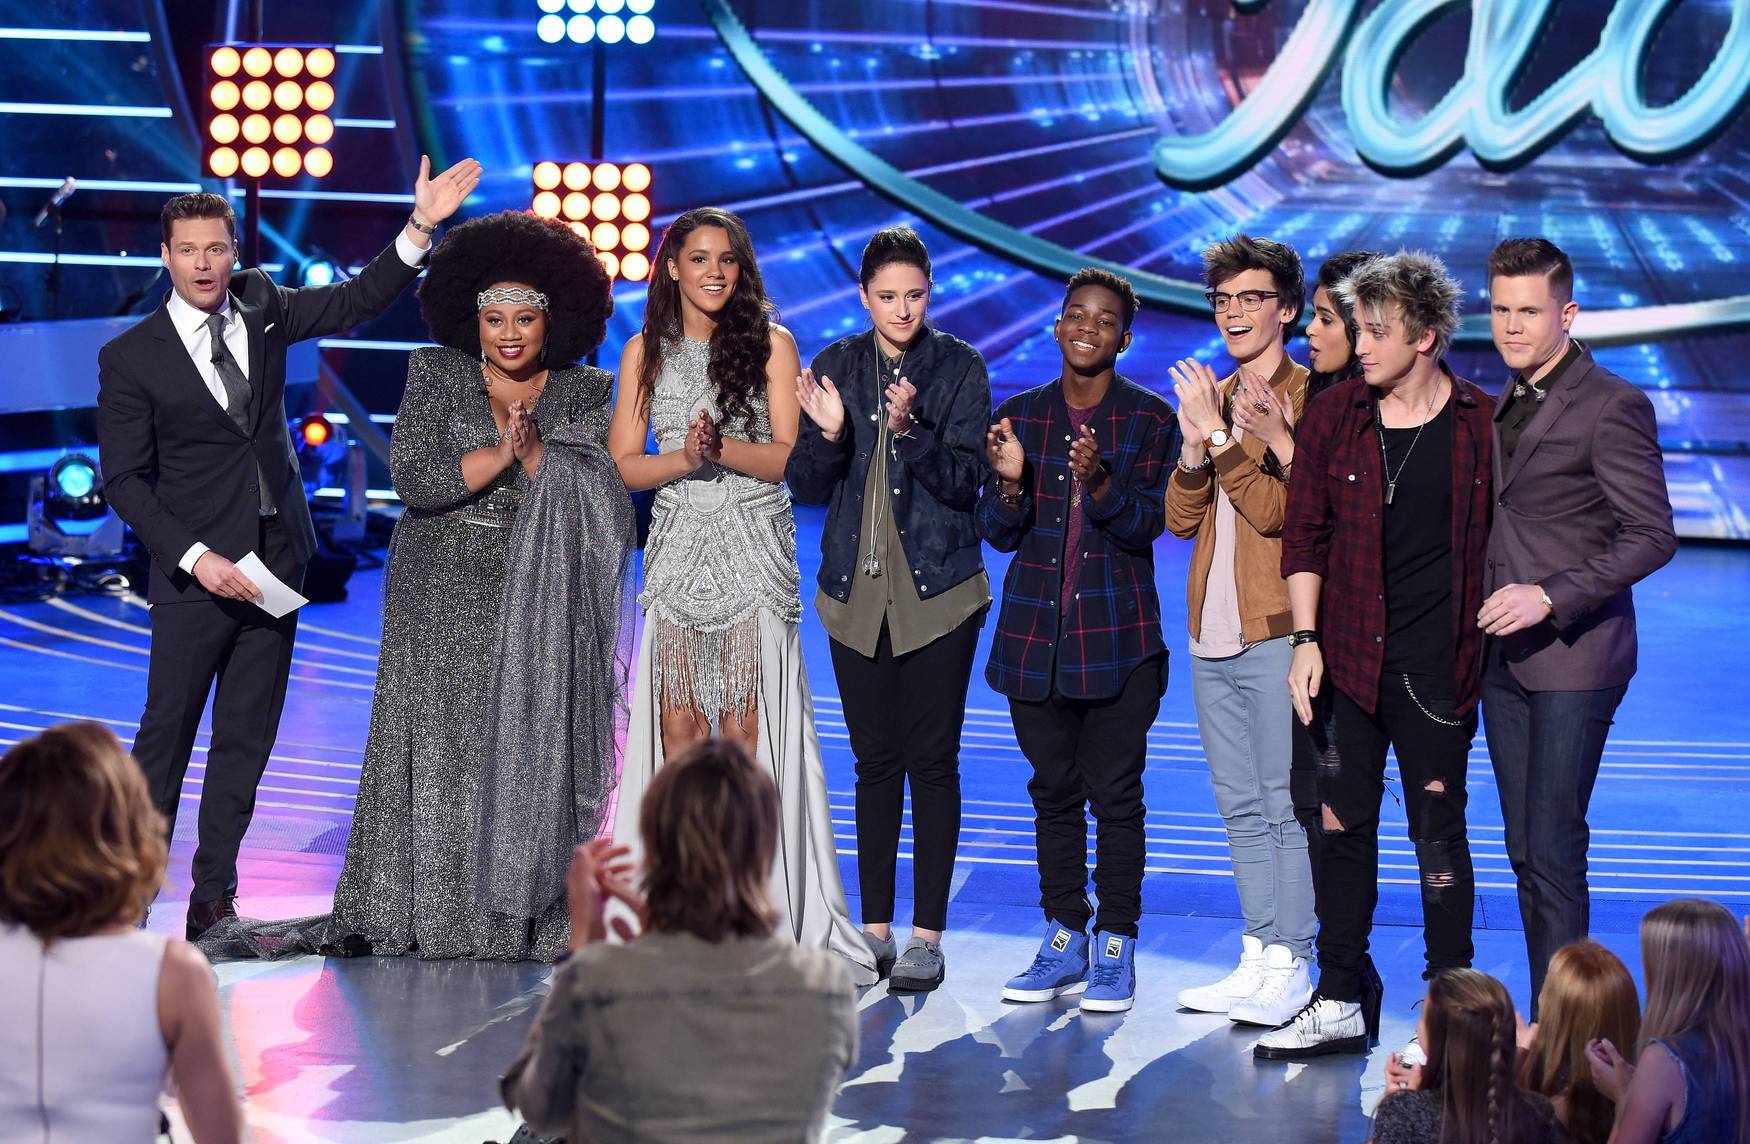 American Idol Top 8 Revealed: Who went home?